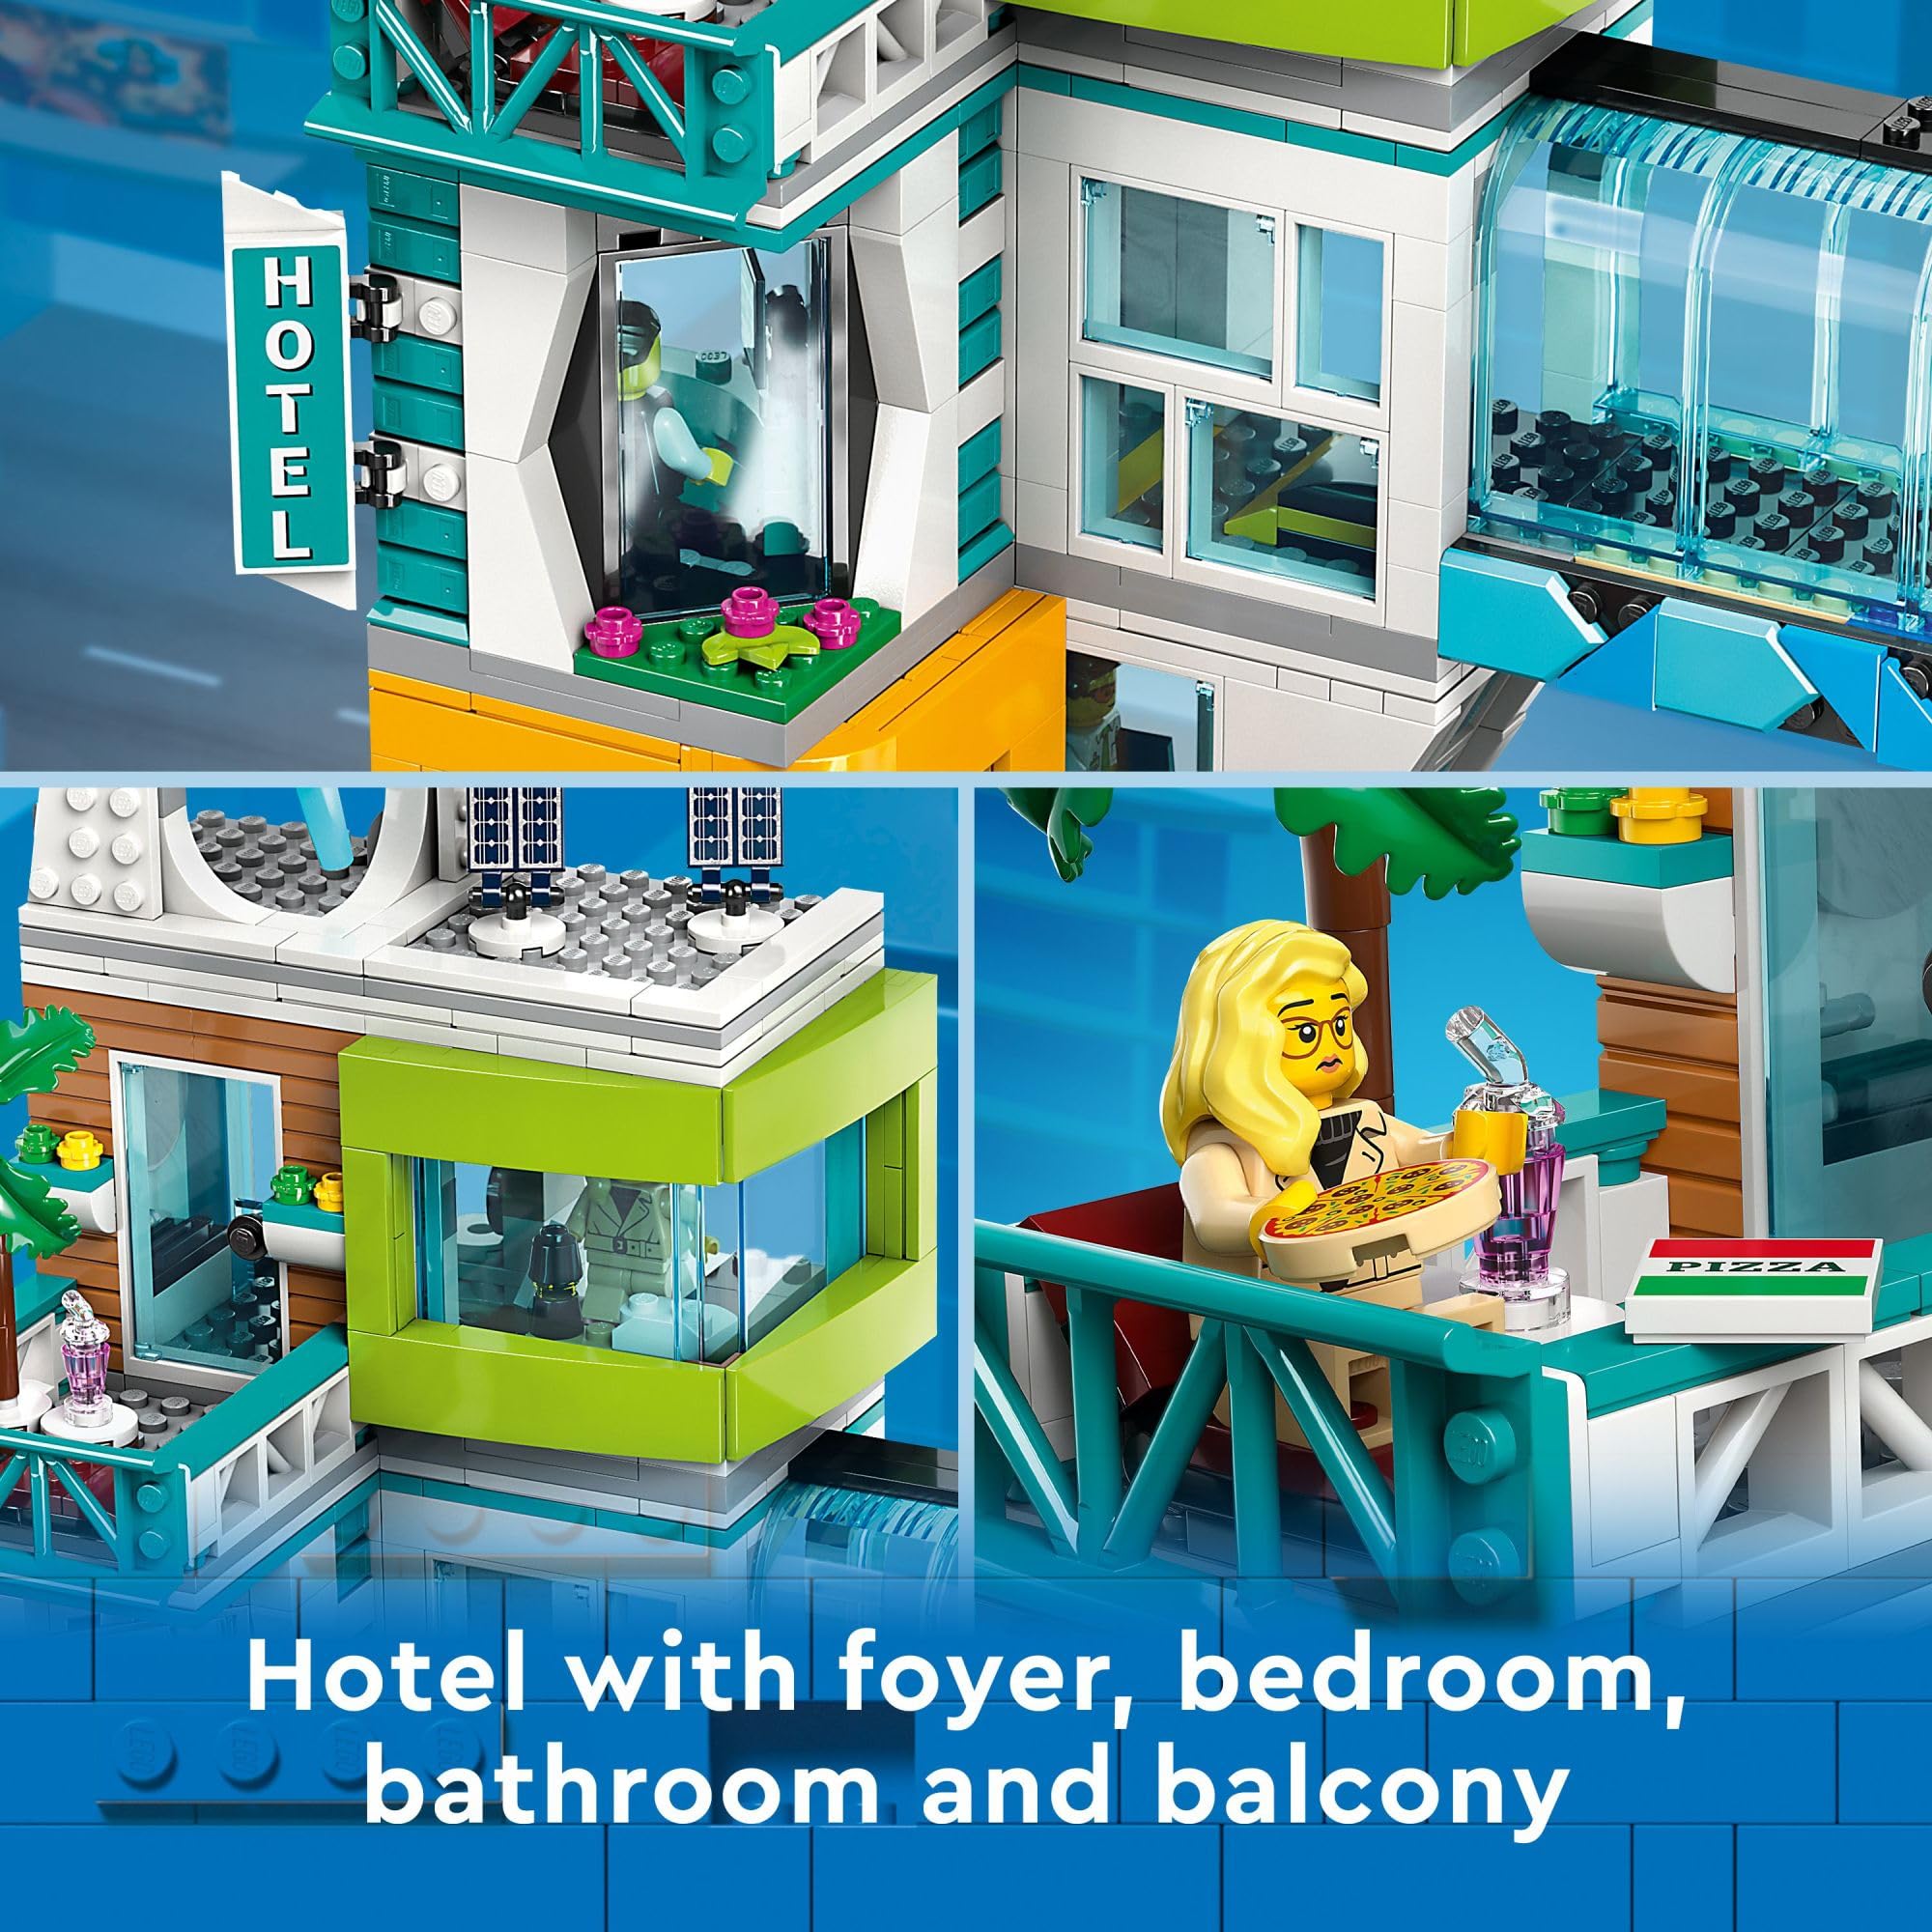 LEGO City Downtown 60380 Building Toy Set, Multi-Feature Playset with Connecting Room Modules, Includes 14 Inspiring Minifigure Characters and a Dog Figure for Imaginative Play, Gift for Kids Ages 8+